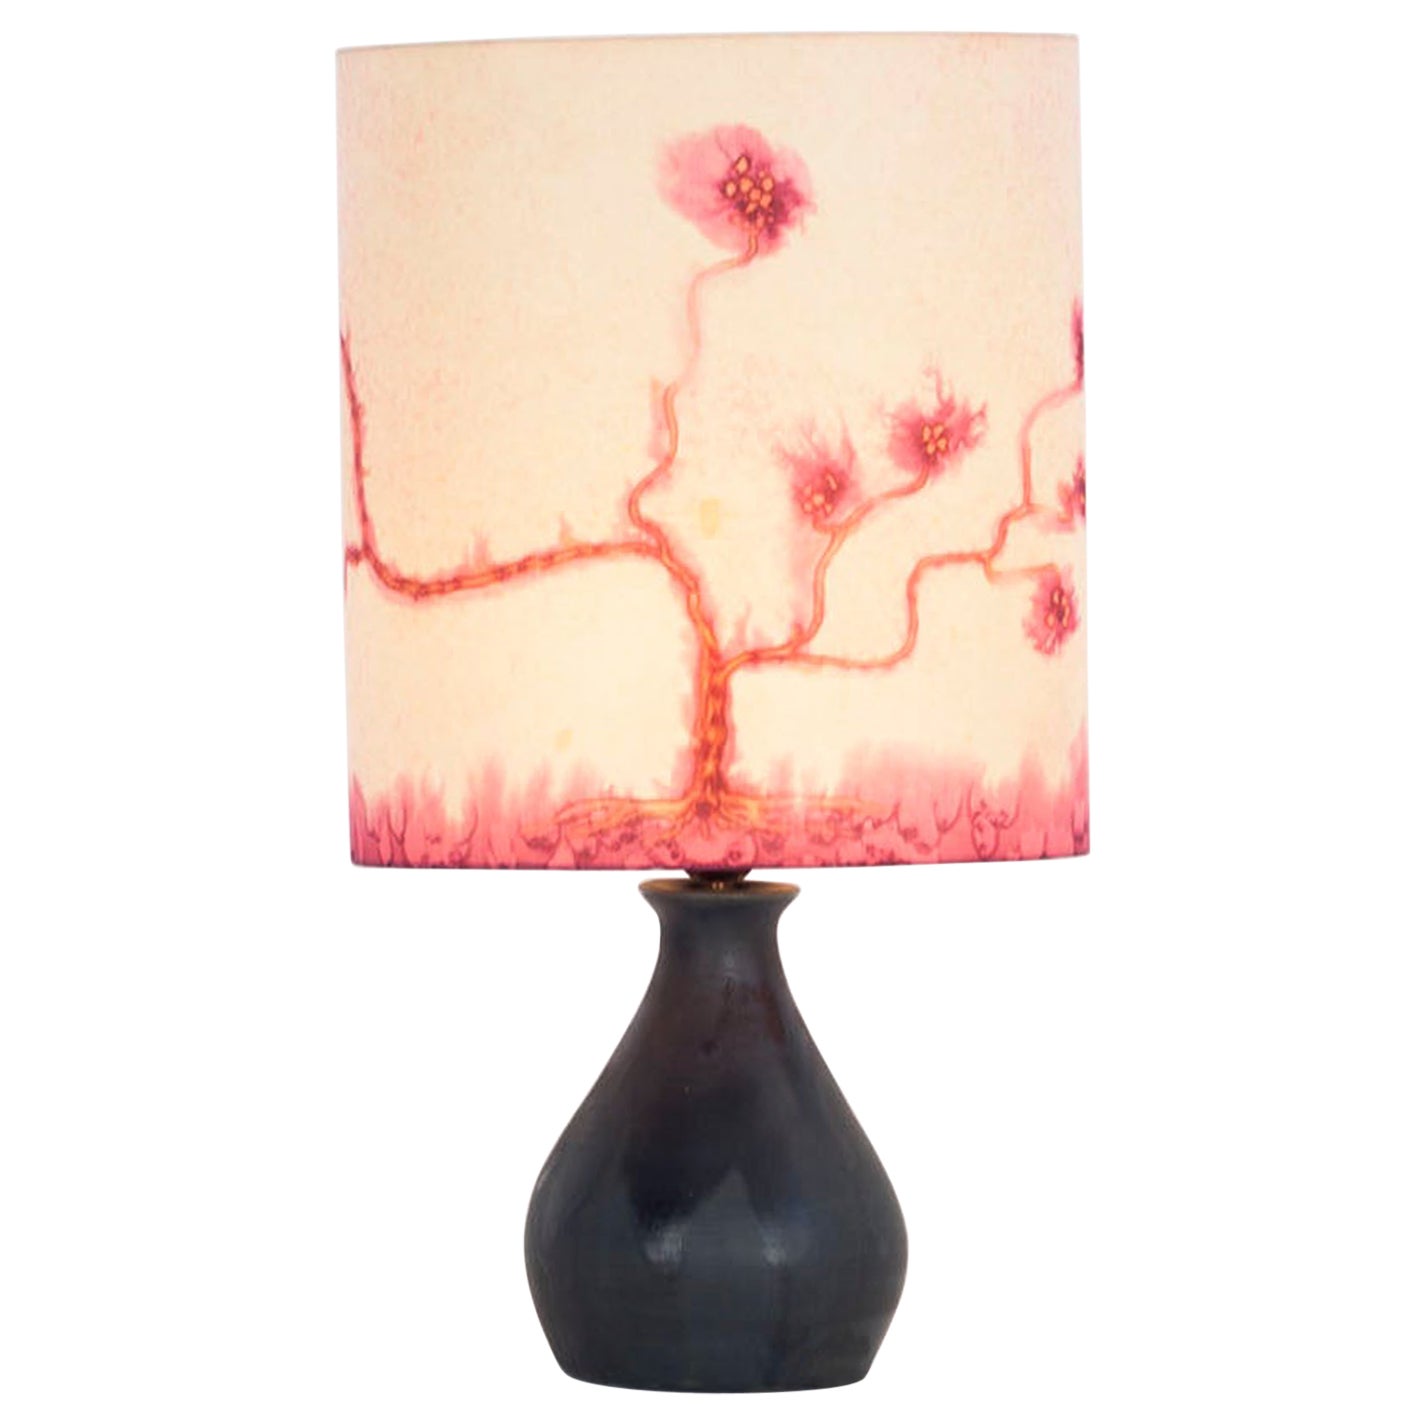 70s Table Lamp with Black Ceramic Base and a Silk Covered Lampshade